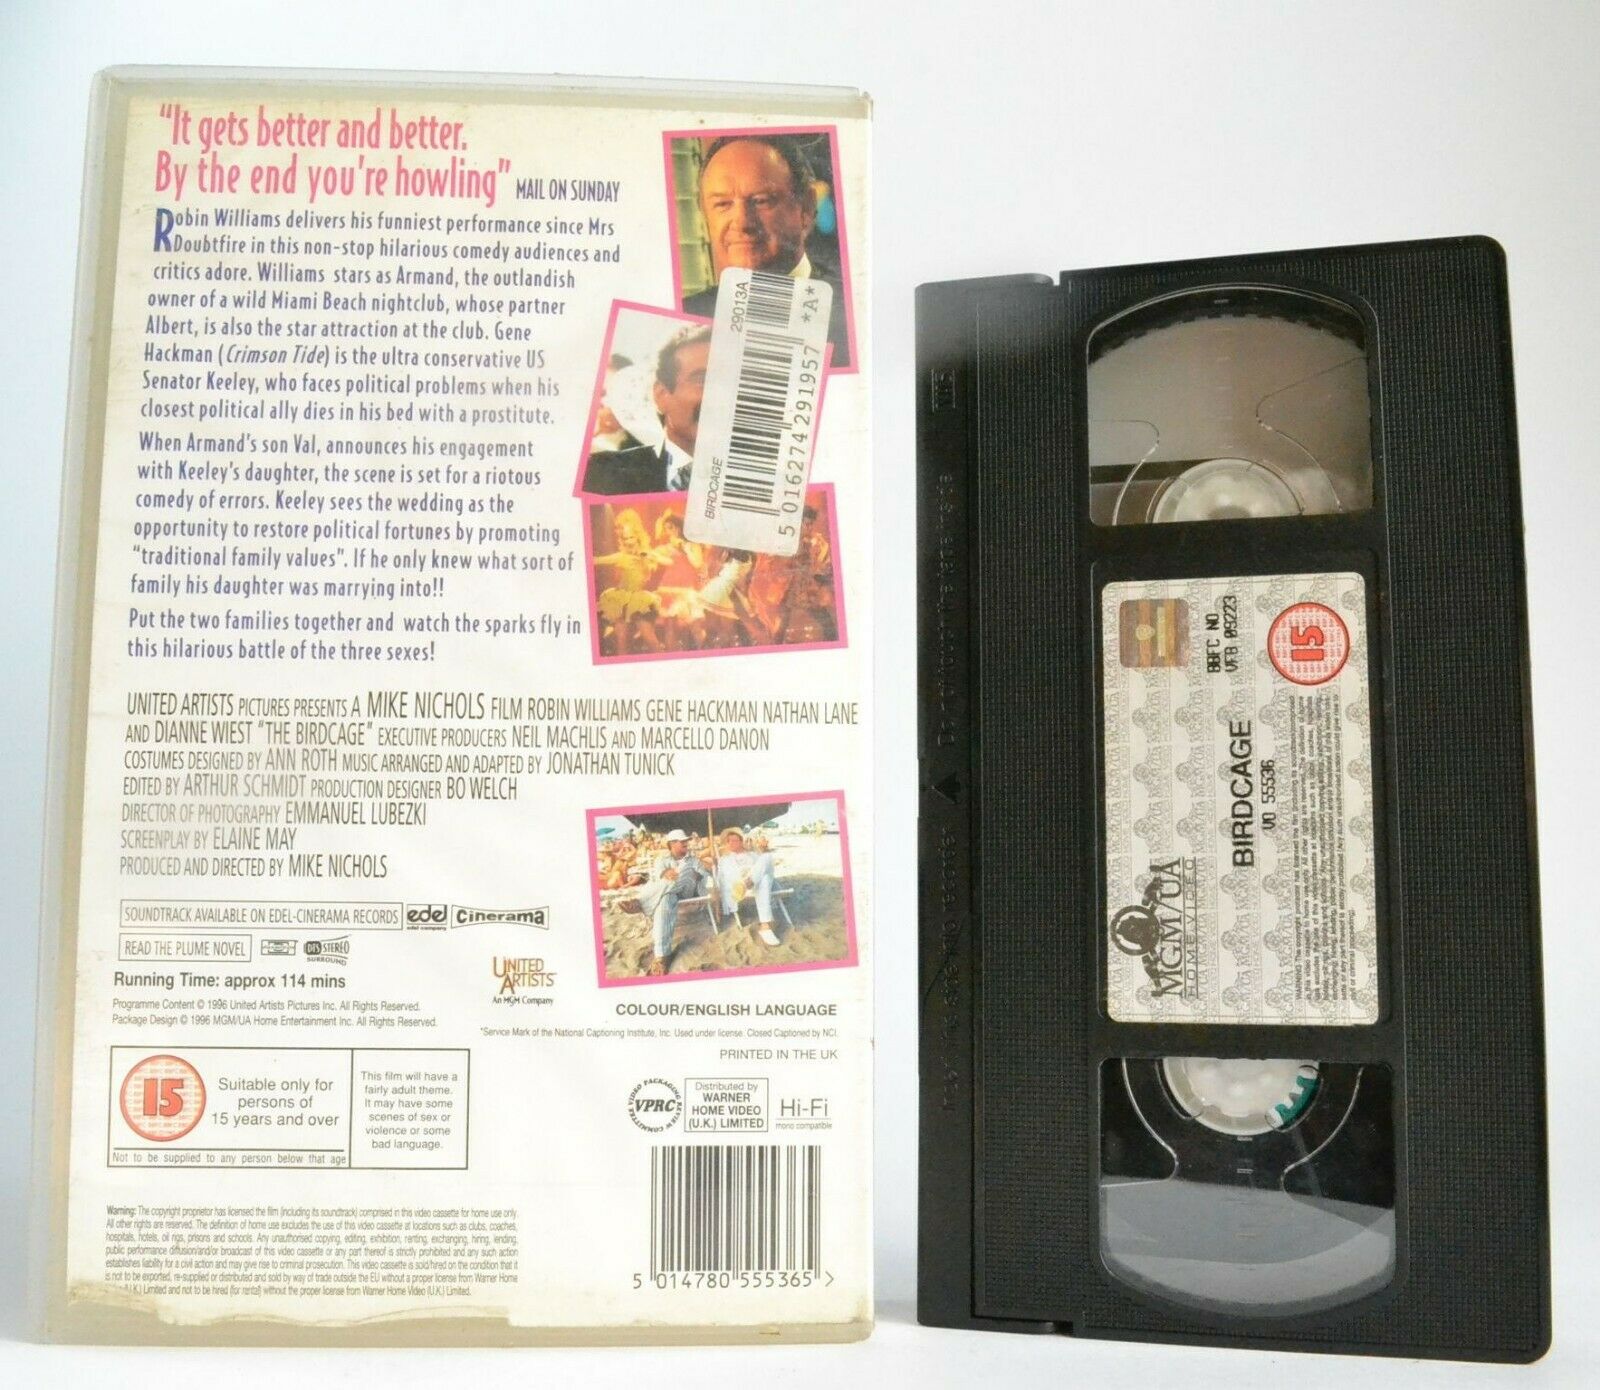 The Birdcage (1996); [Mike Nichols] - Drag Club Disaster - Robin Williams - VHS-